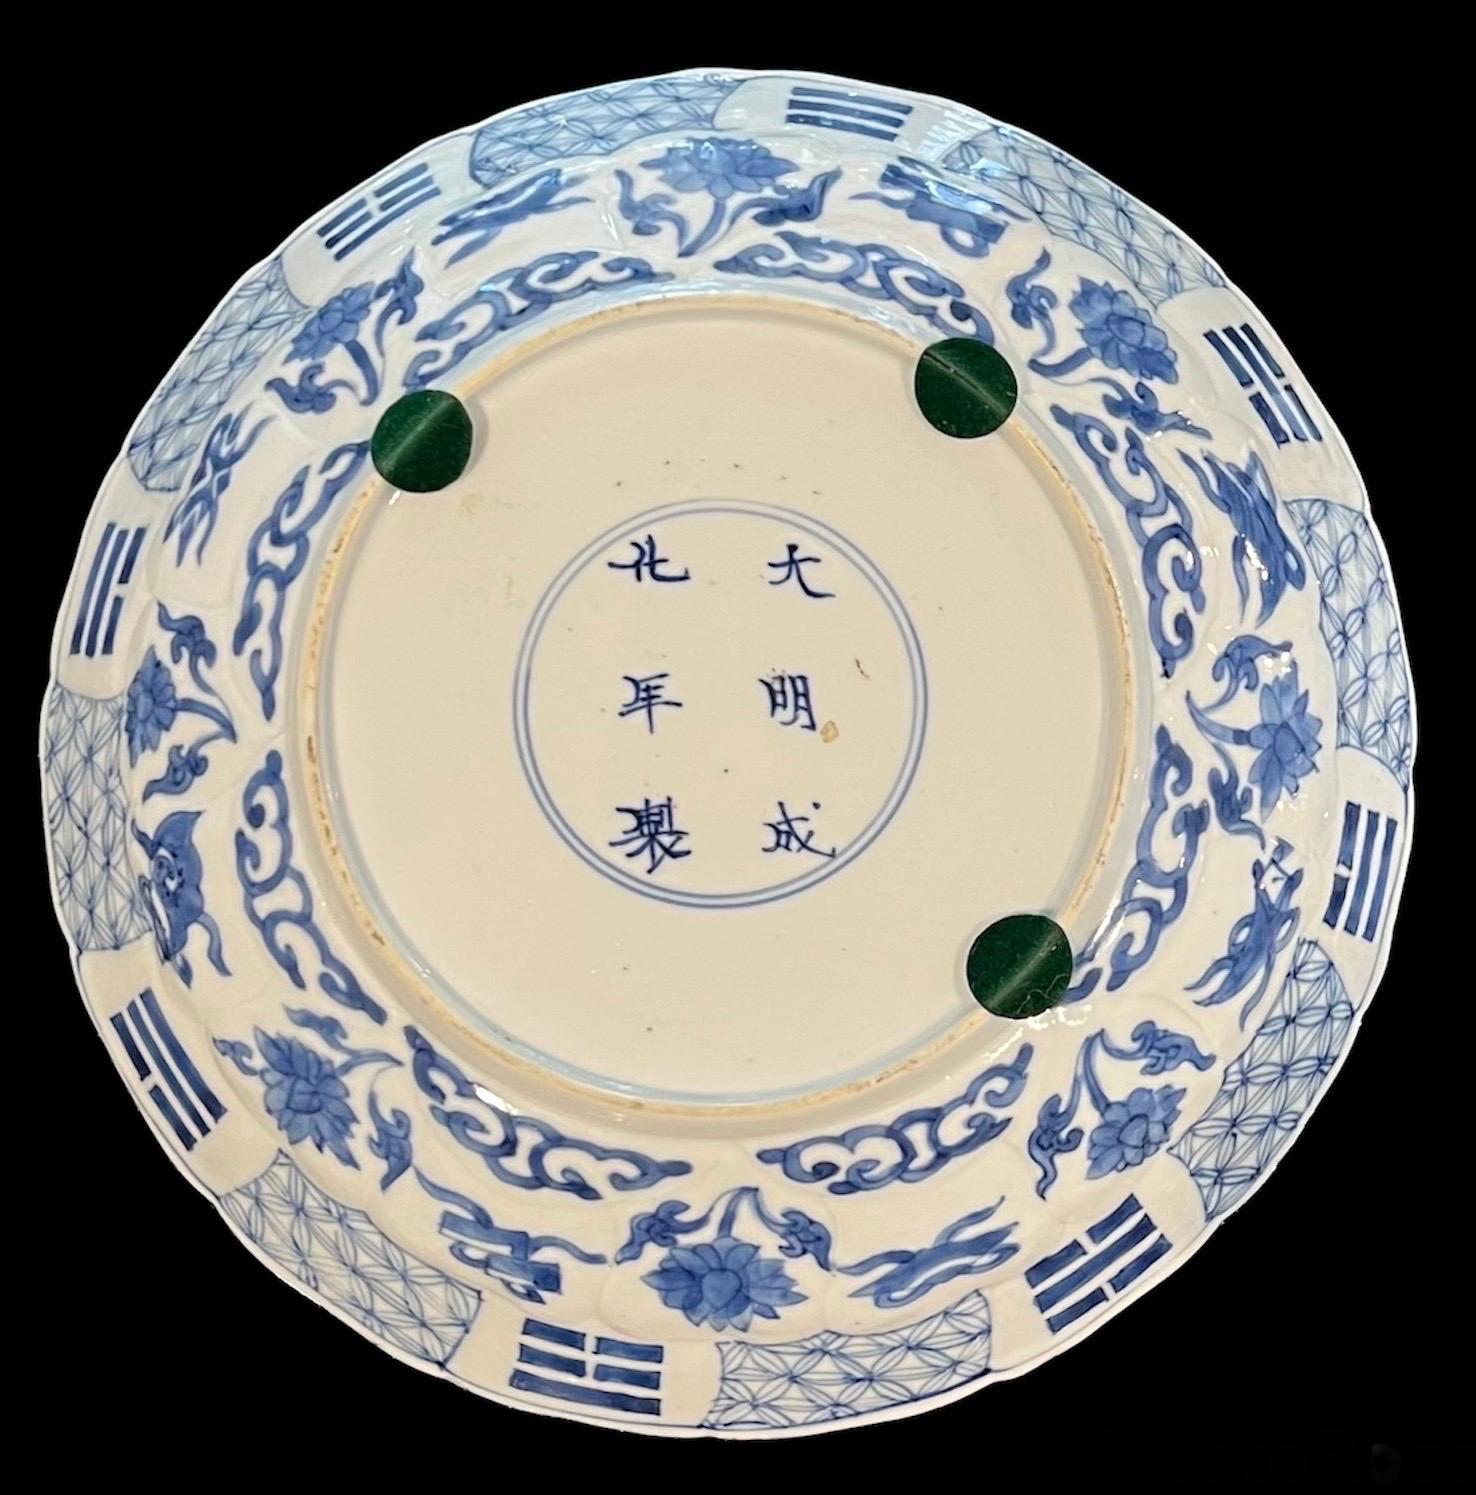 Kangxi period molded blue & white dish
The center painted with 2 figures in an 
Interior with molded foliage medallion surrounded by 
Flower sprigs alternating with the ba jixiang in molded 
Petal reserves in the well, base with six character